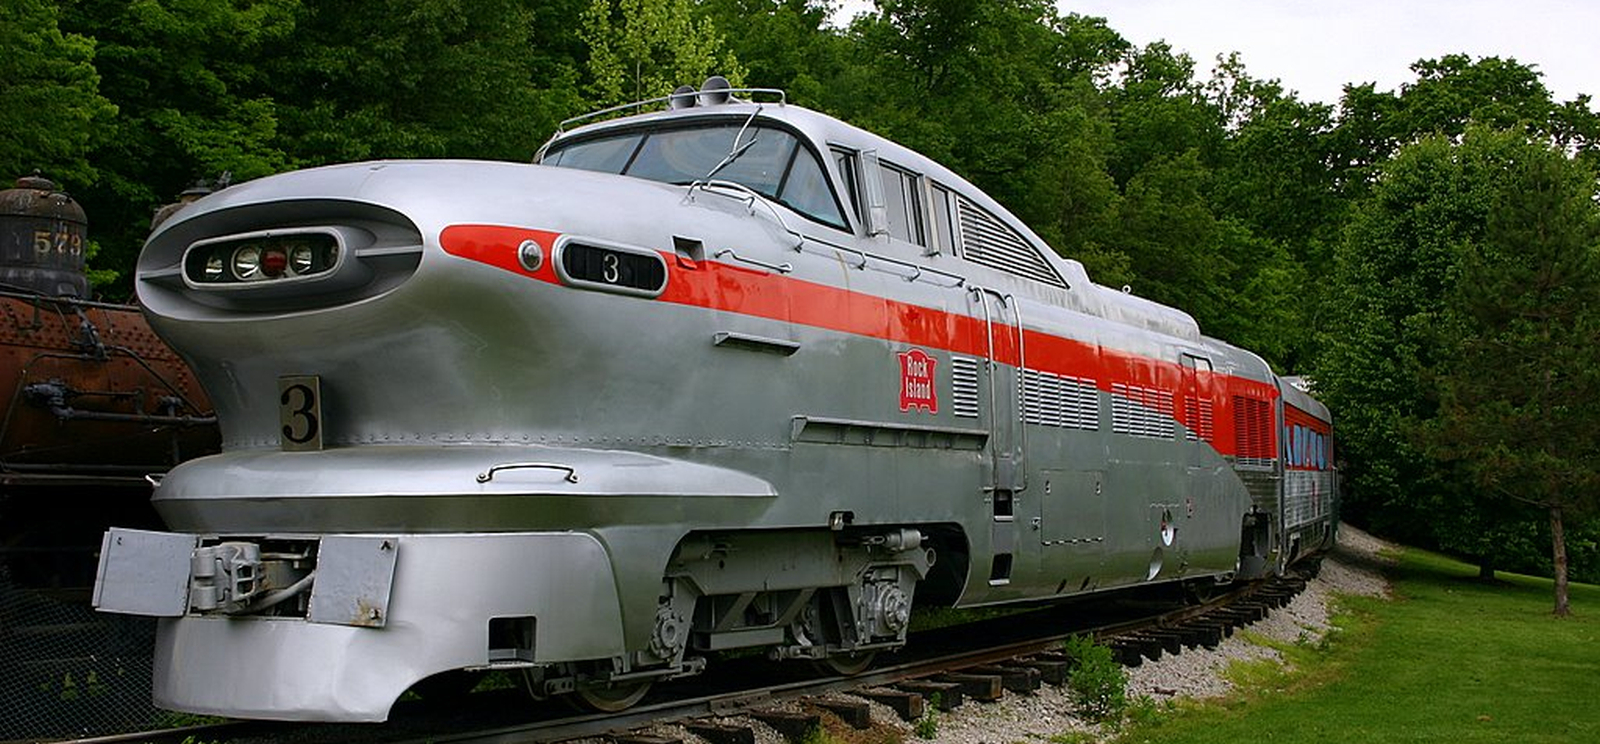 Aerotrain No. 3 at the St. Louis Museum of Transportation